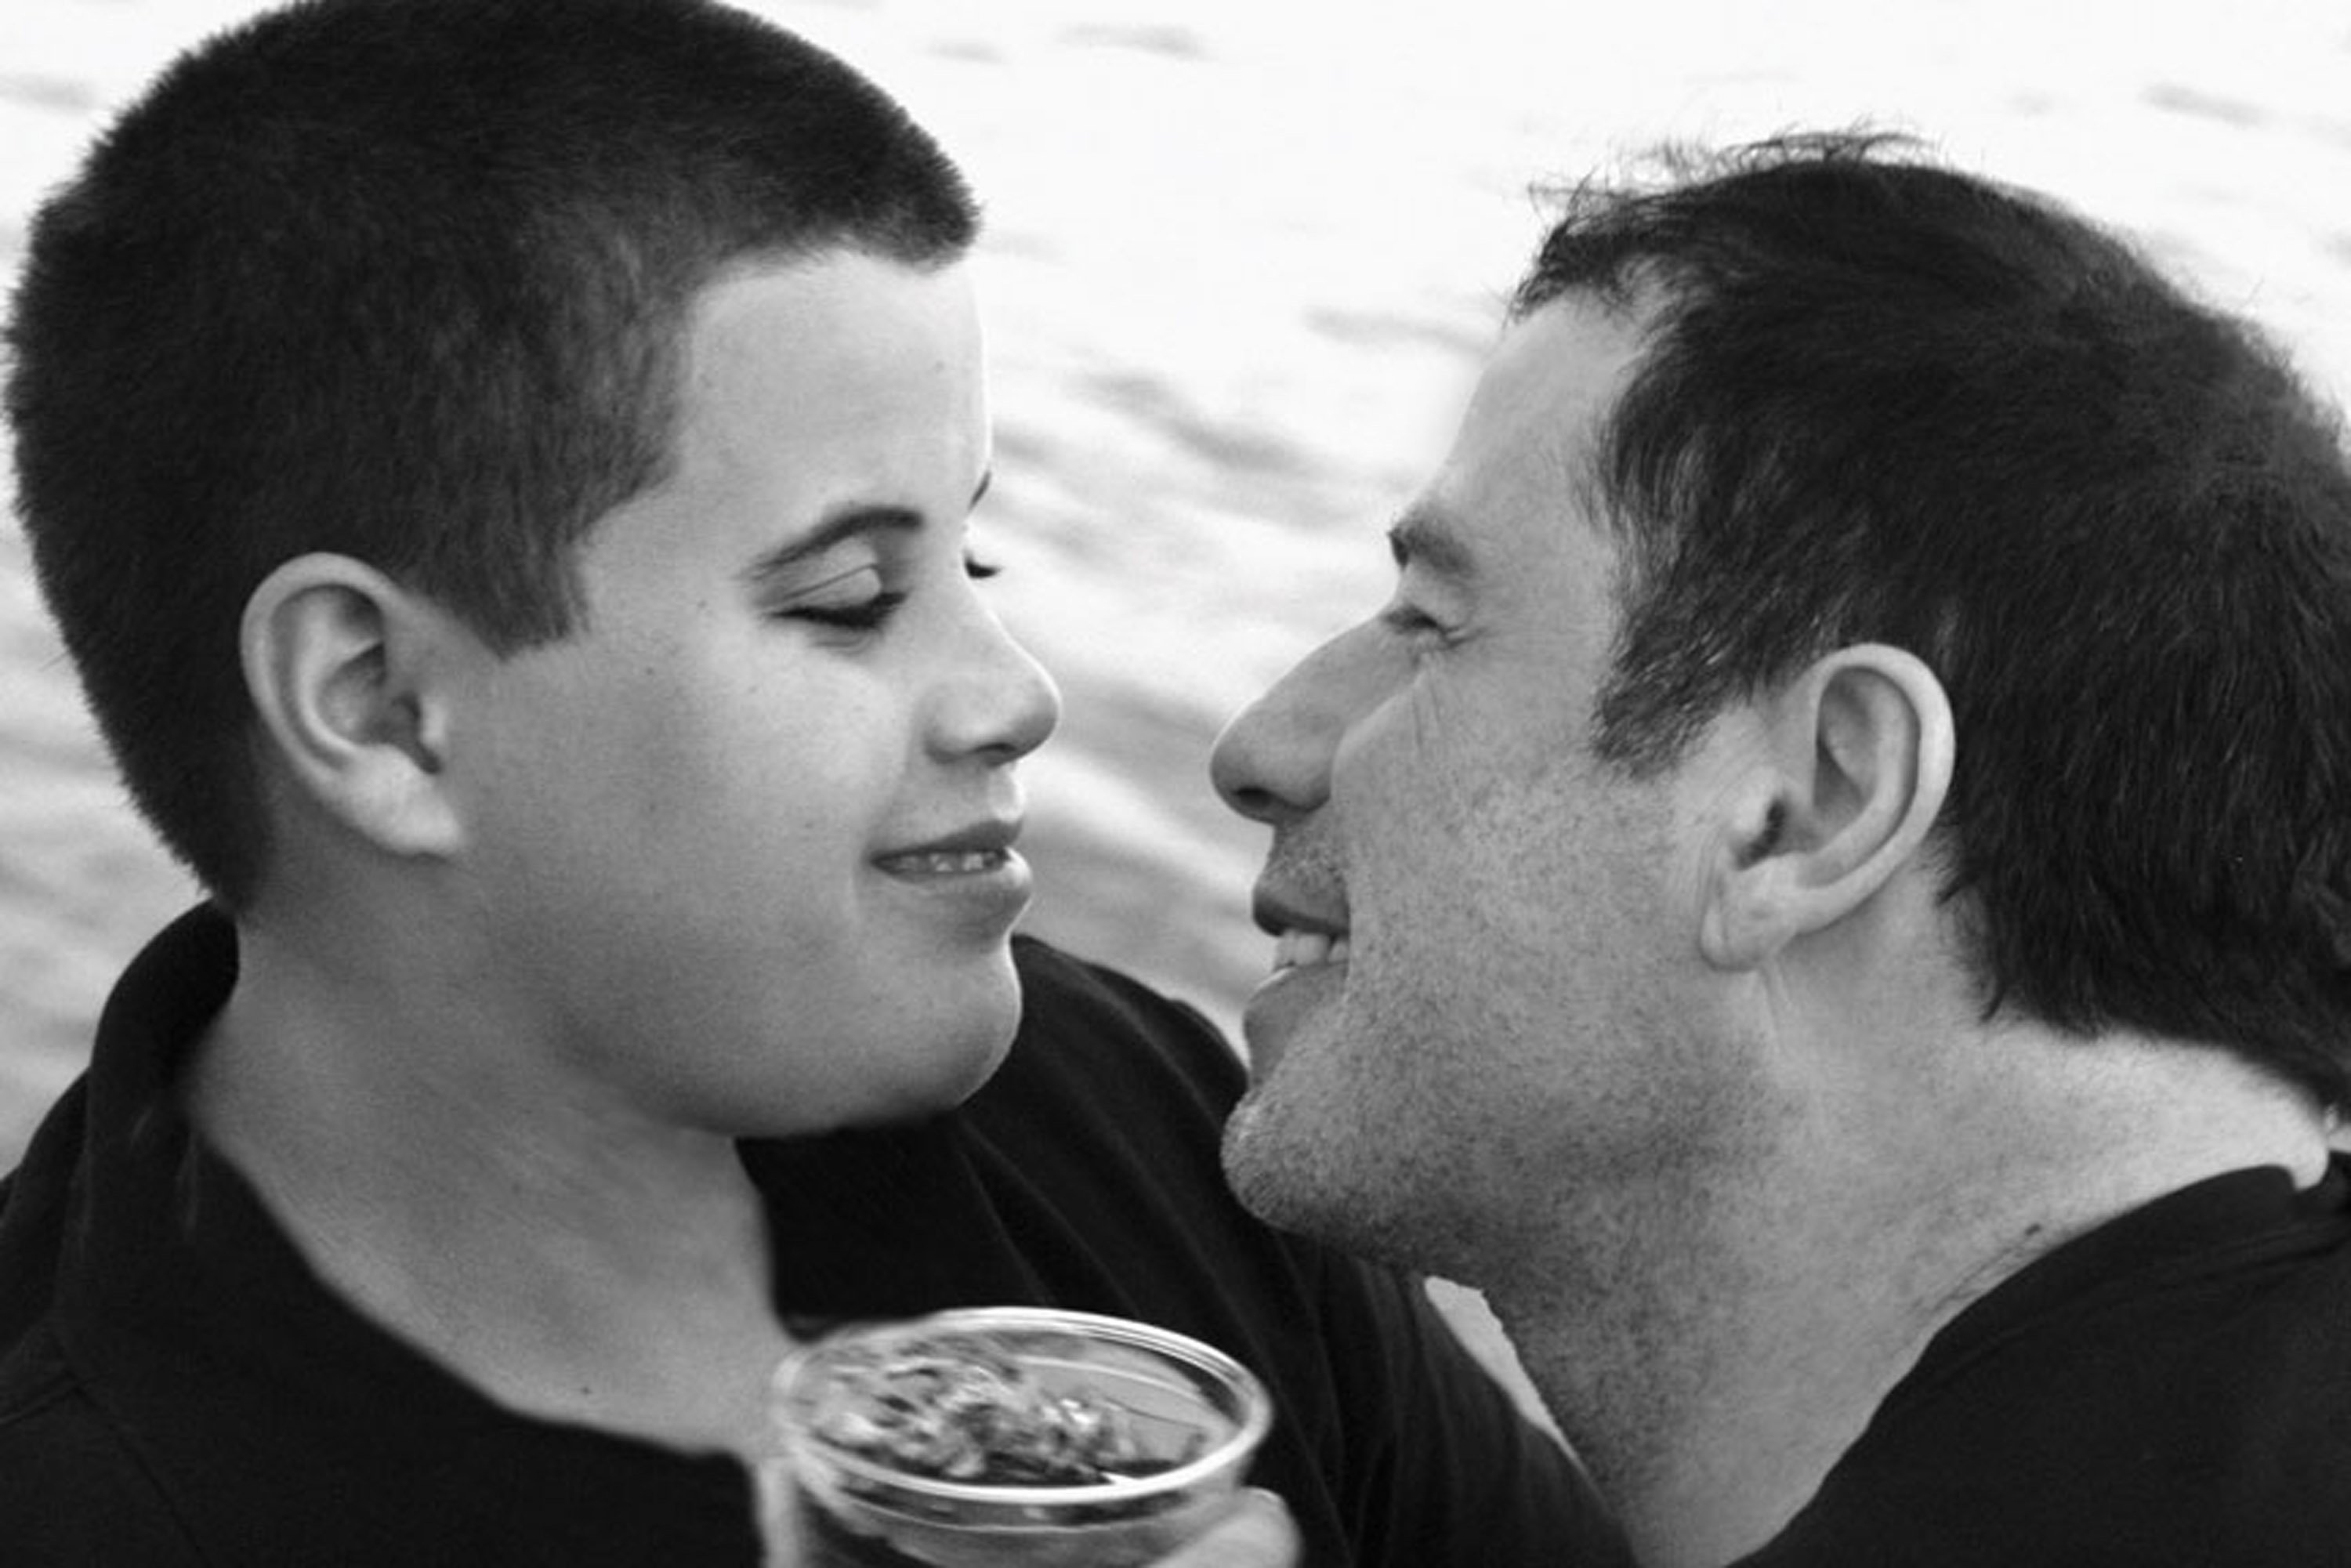 Jett Travolta is seen with his father, actor John Travolta in this picture. | Source: Getty Images